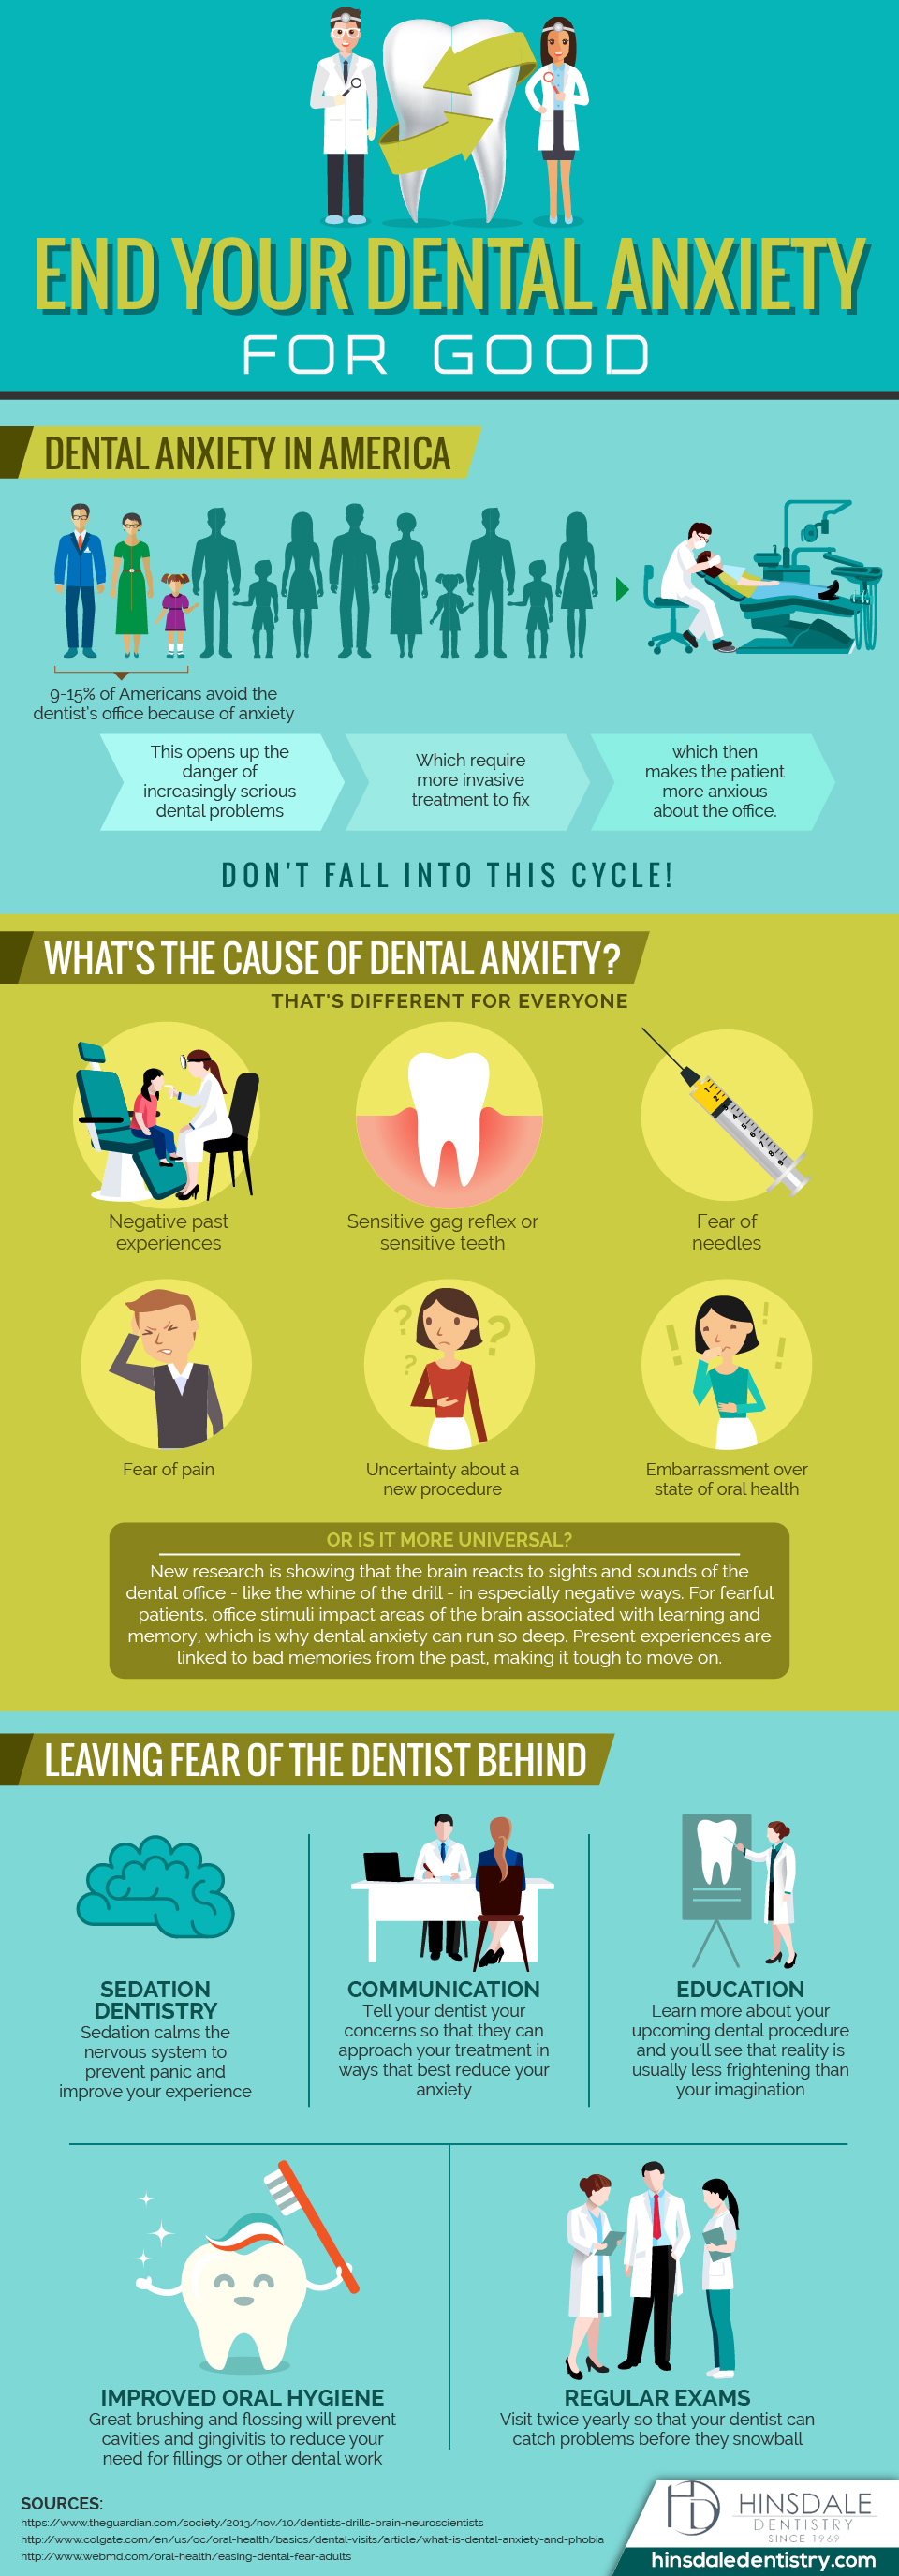 infographic showing ways to end dental anxiety by Hinsdale Dentistry